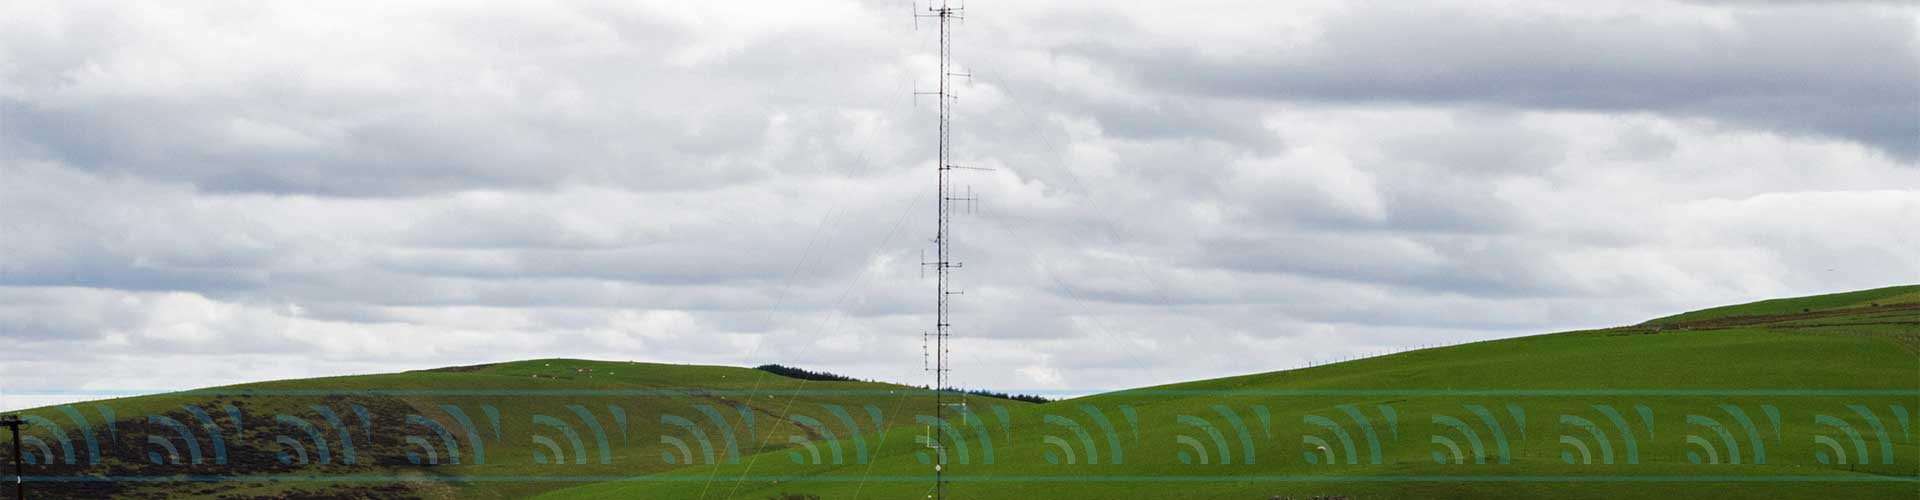 radio antenna masts for hire across Wales including towable mobile towers